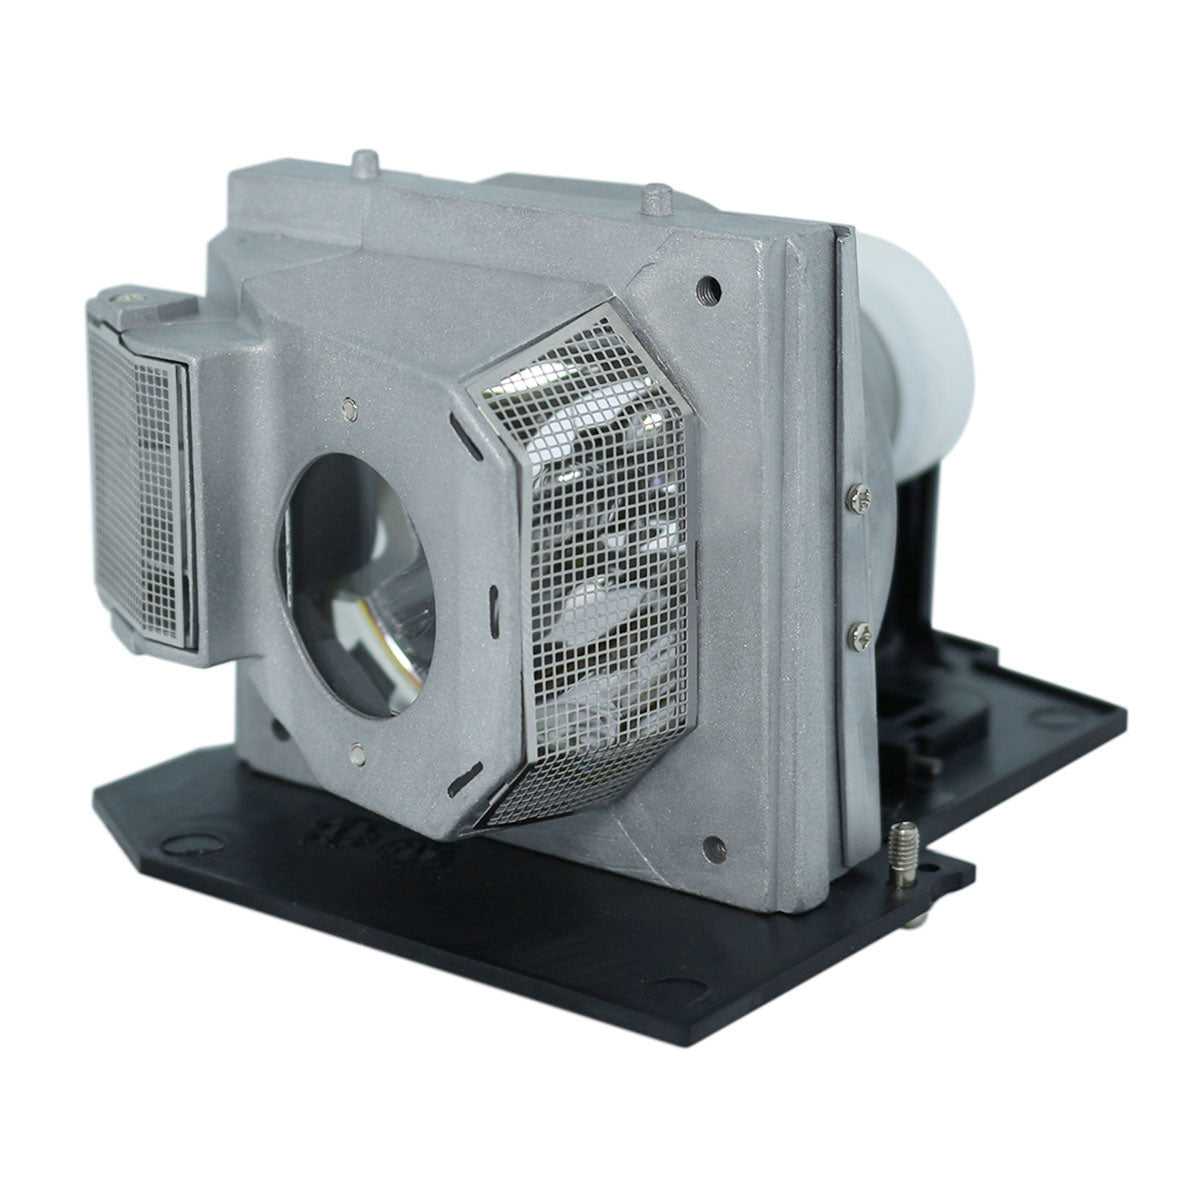 Knoll Systems SP-LAMP-032 Philips Projector Lamp Module